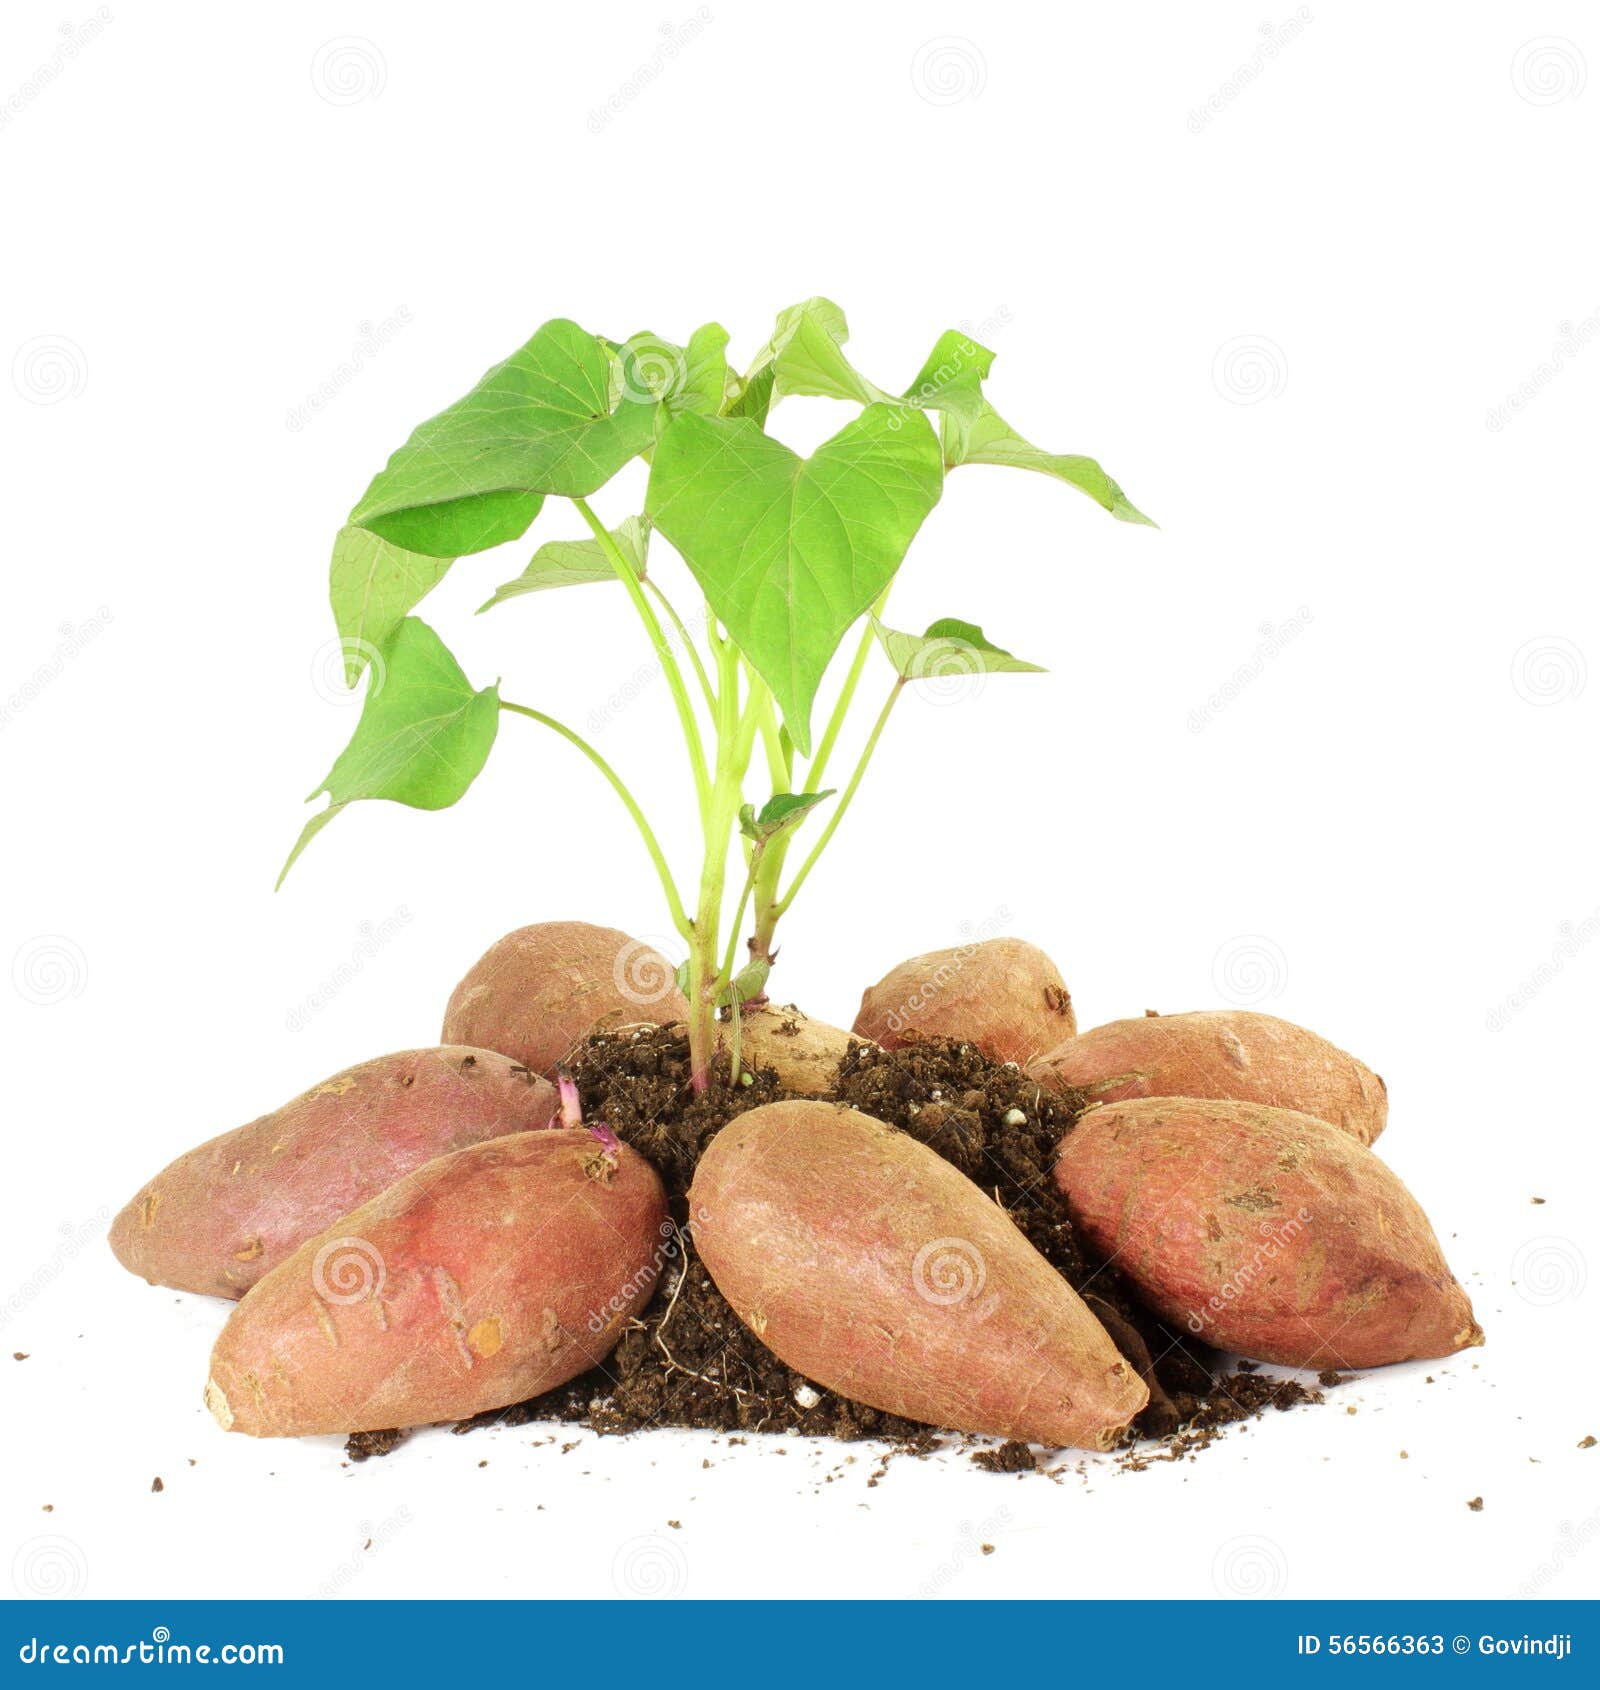 Growing Sweet Potato With Shoots On White Background Stock Image Image Of Isolated Growing 56566363,Indian Hawthorn Plant